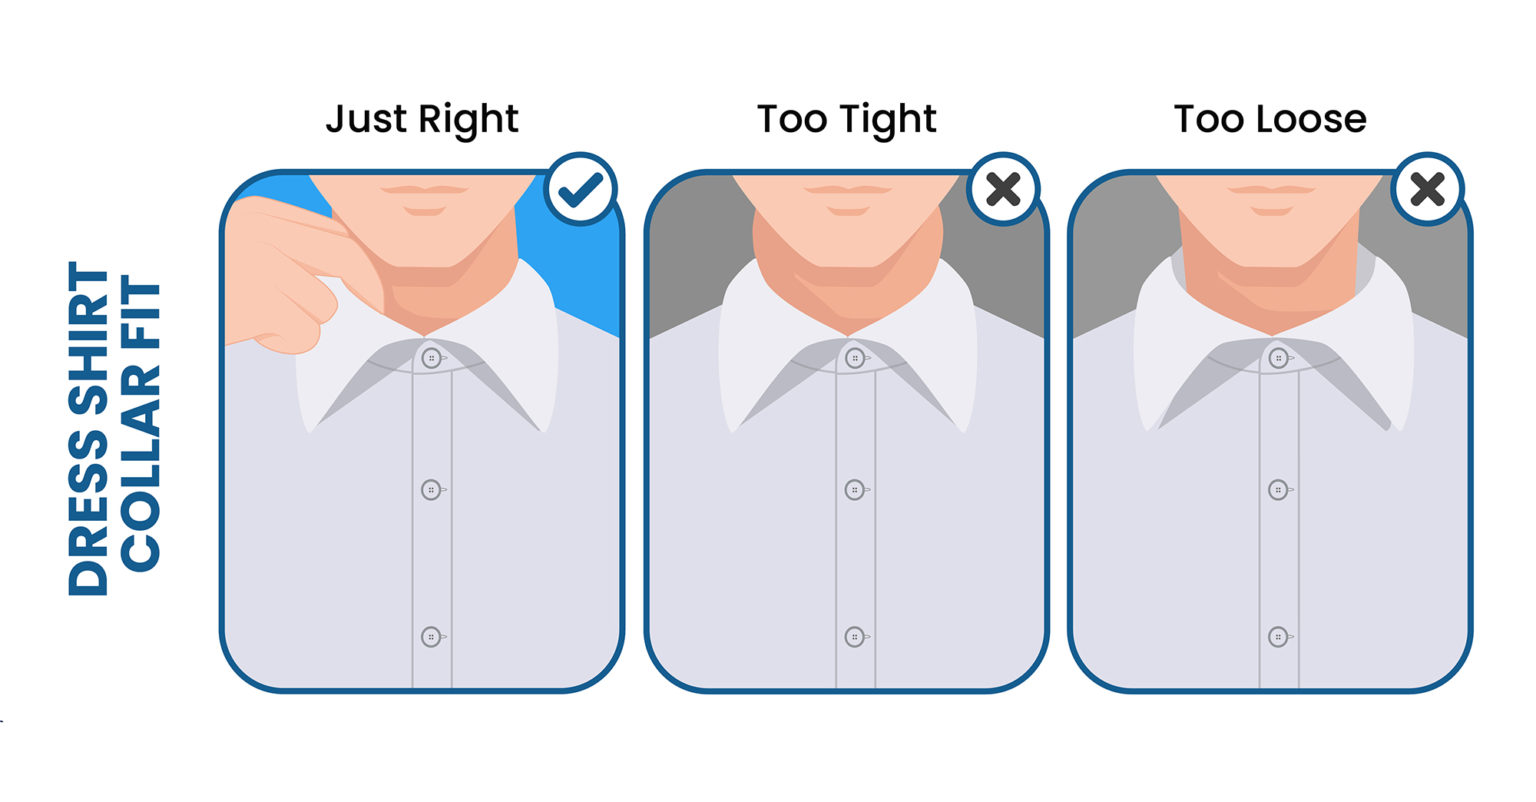 Men's Dress Shirt Styles & Types: Ultimate Guide - Suits Expert